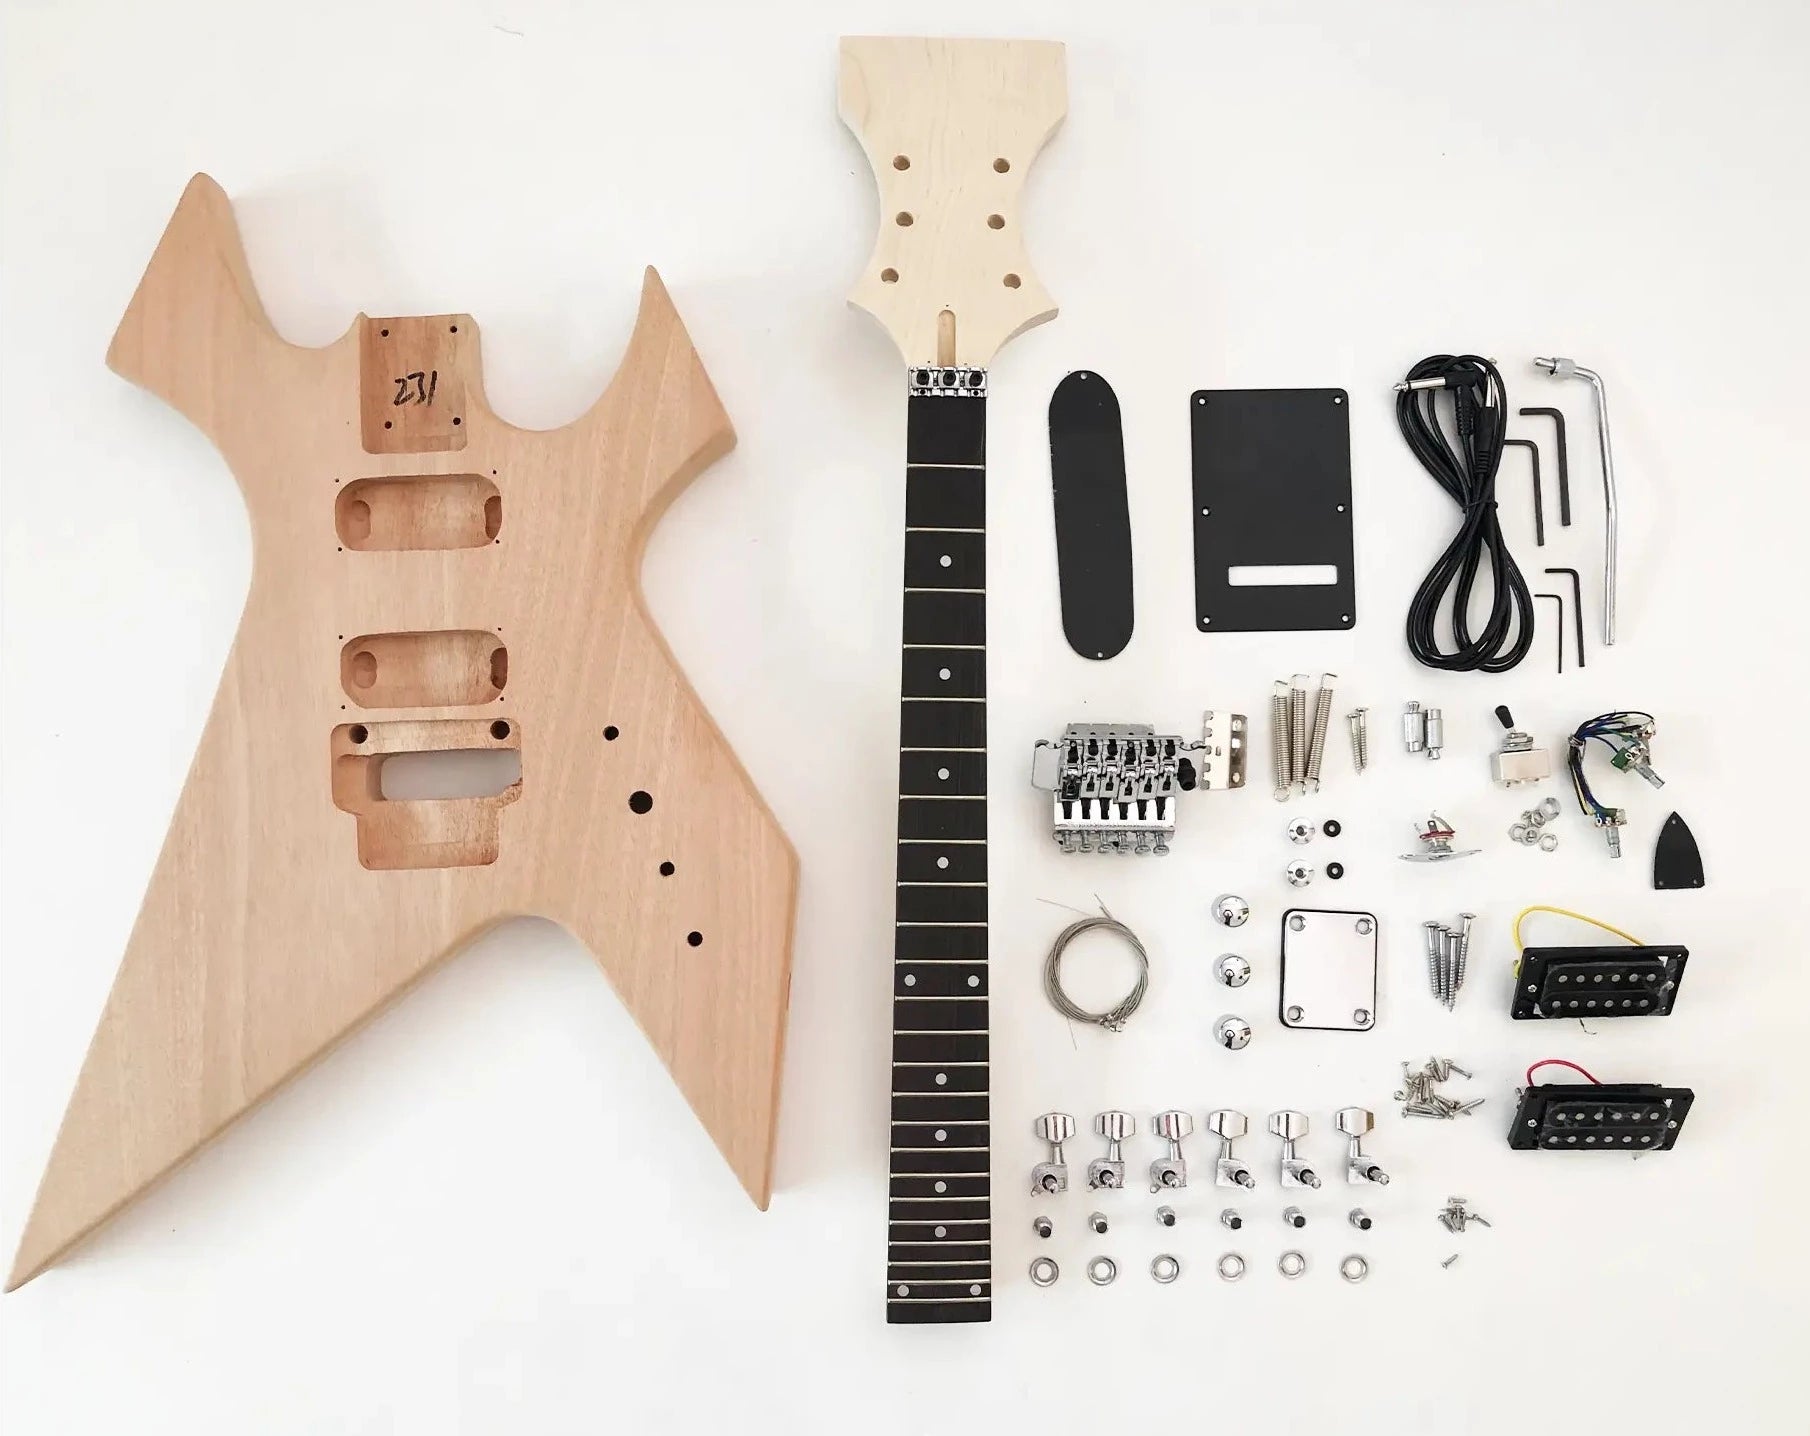 TheFretWire The FretWire DIY Flying V Guitar Kit - DIY Build Your Own  Guitar, Guitar Setup Kit, DIY guitar Kit for Beginners and Professionals… V